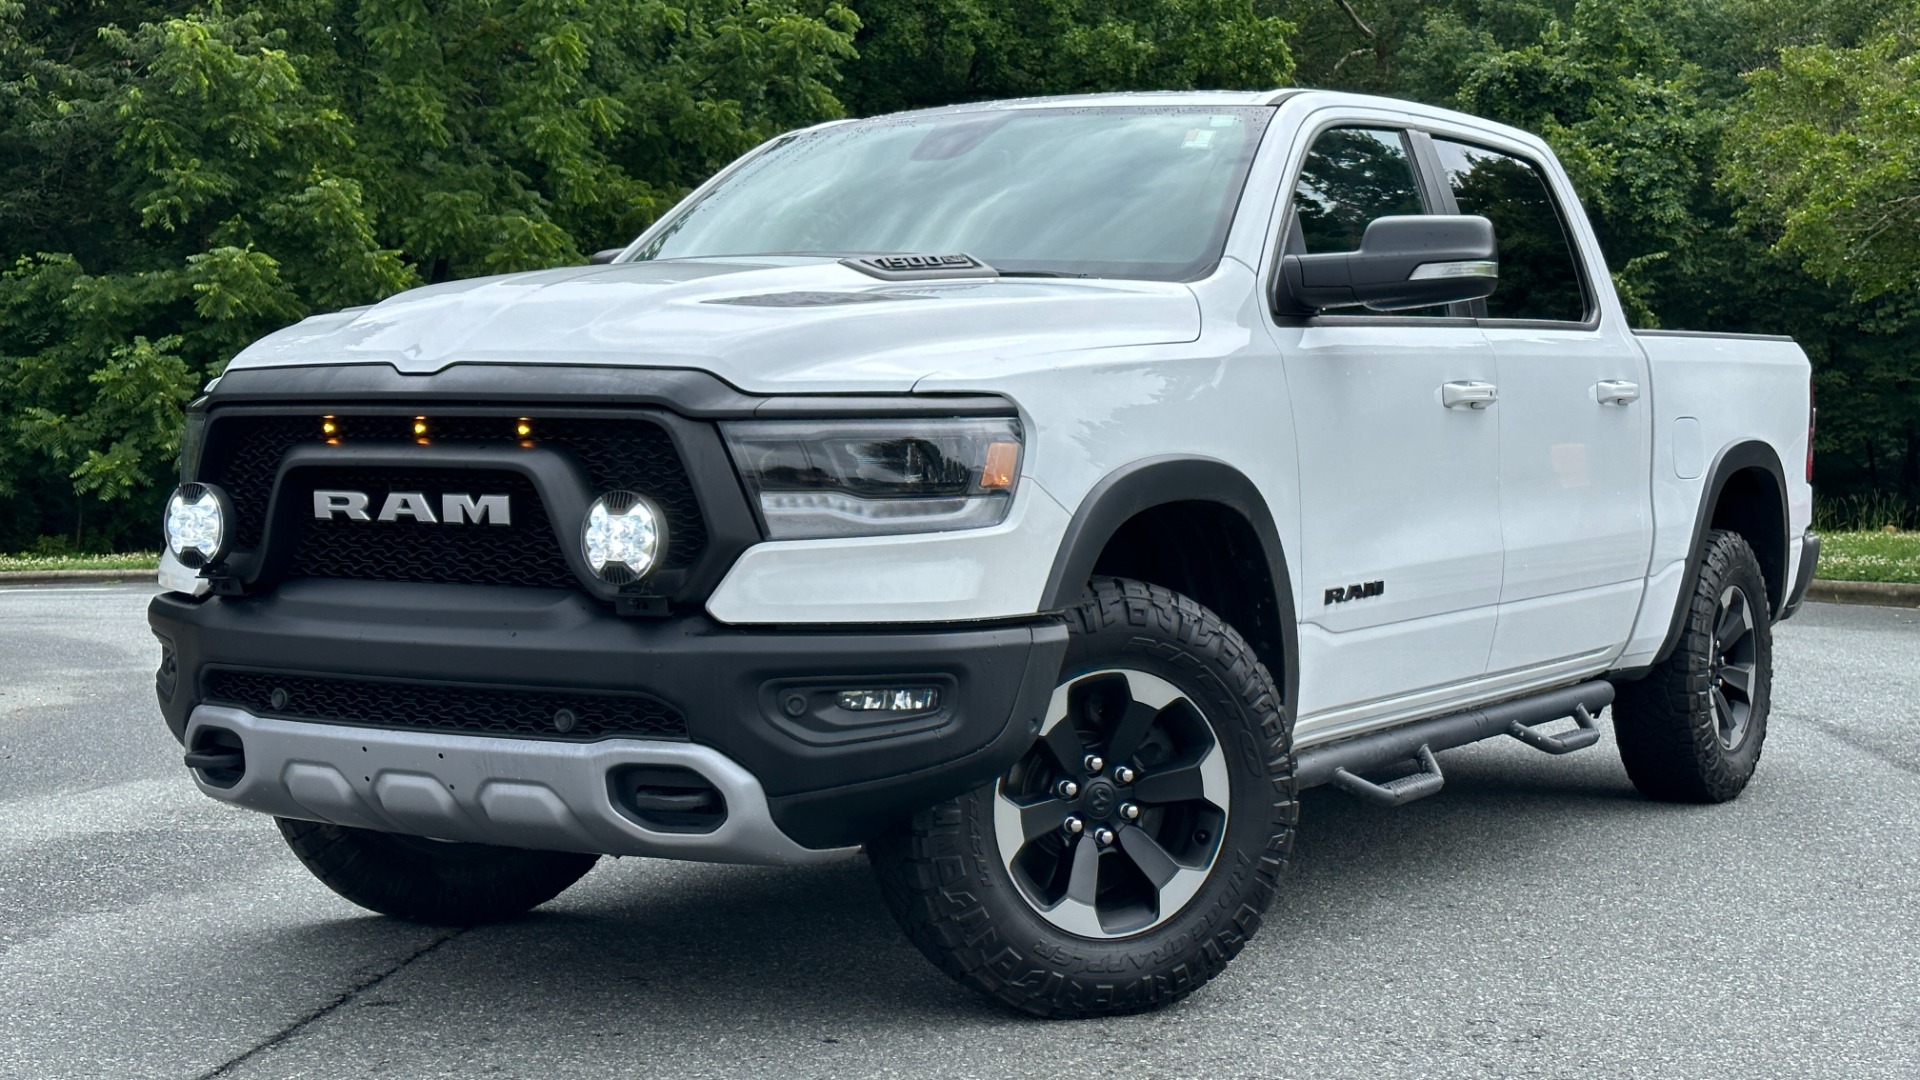 Used 2019 Ram 1500 REBEL / KC LIGHTS / BORLA EXHUAST / ALPINE / TOUCH SCREEN for sale $36,995 at Formula Imports in Charlotte NC 28227 1